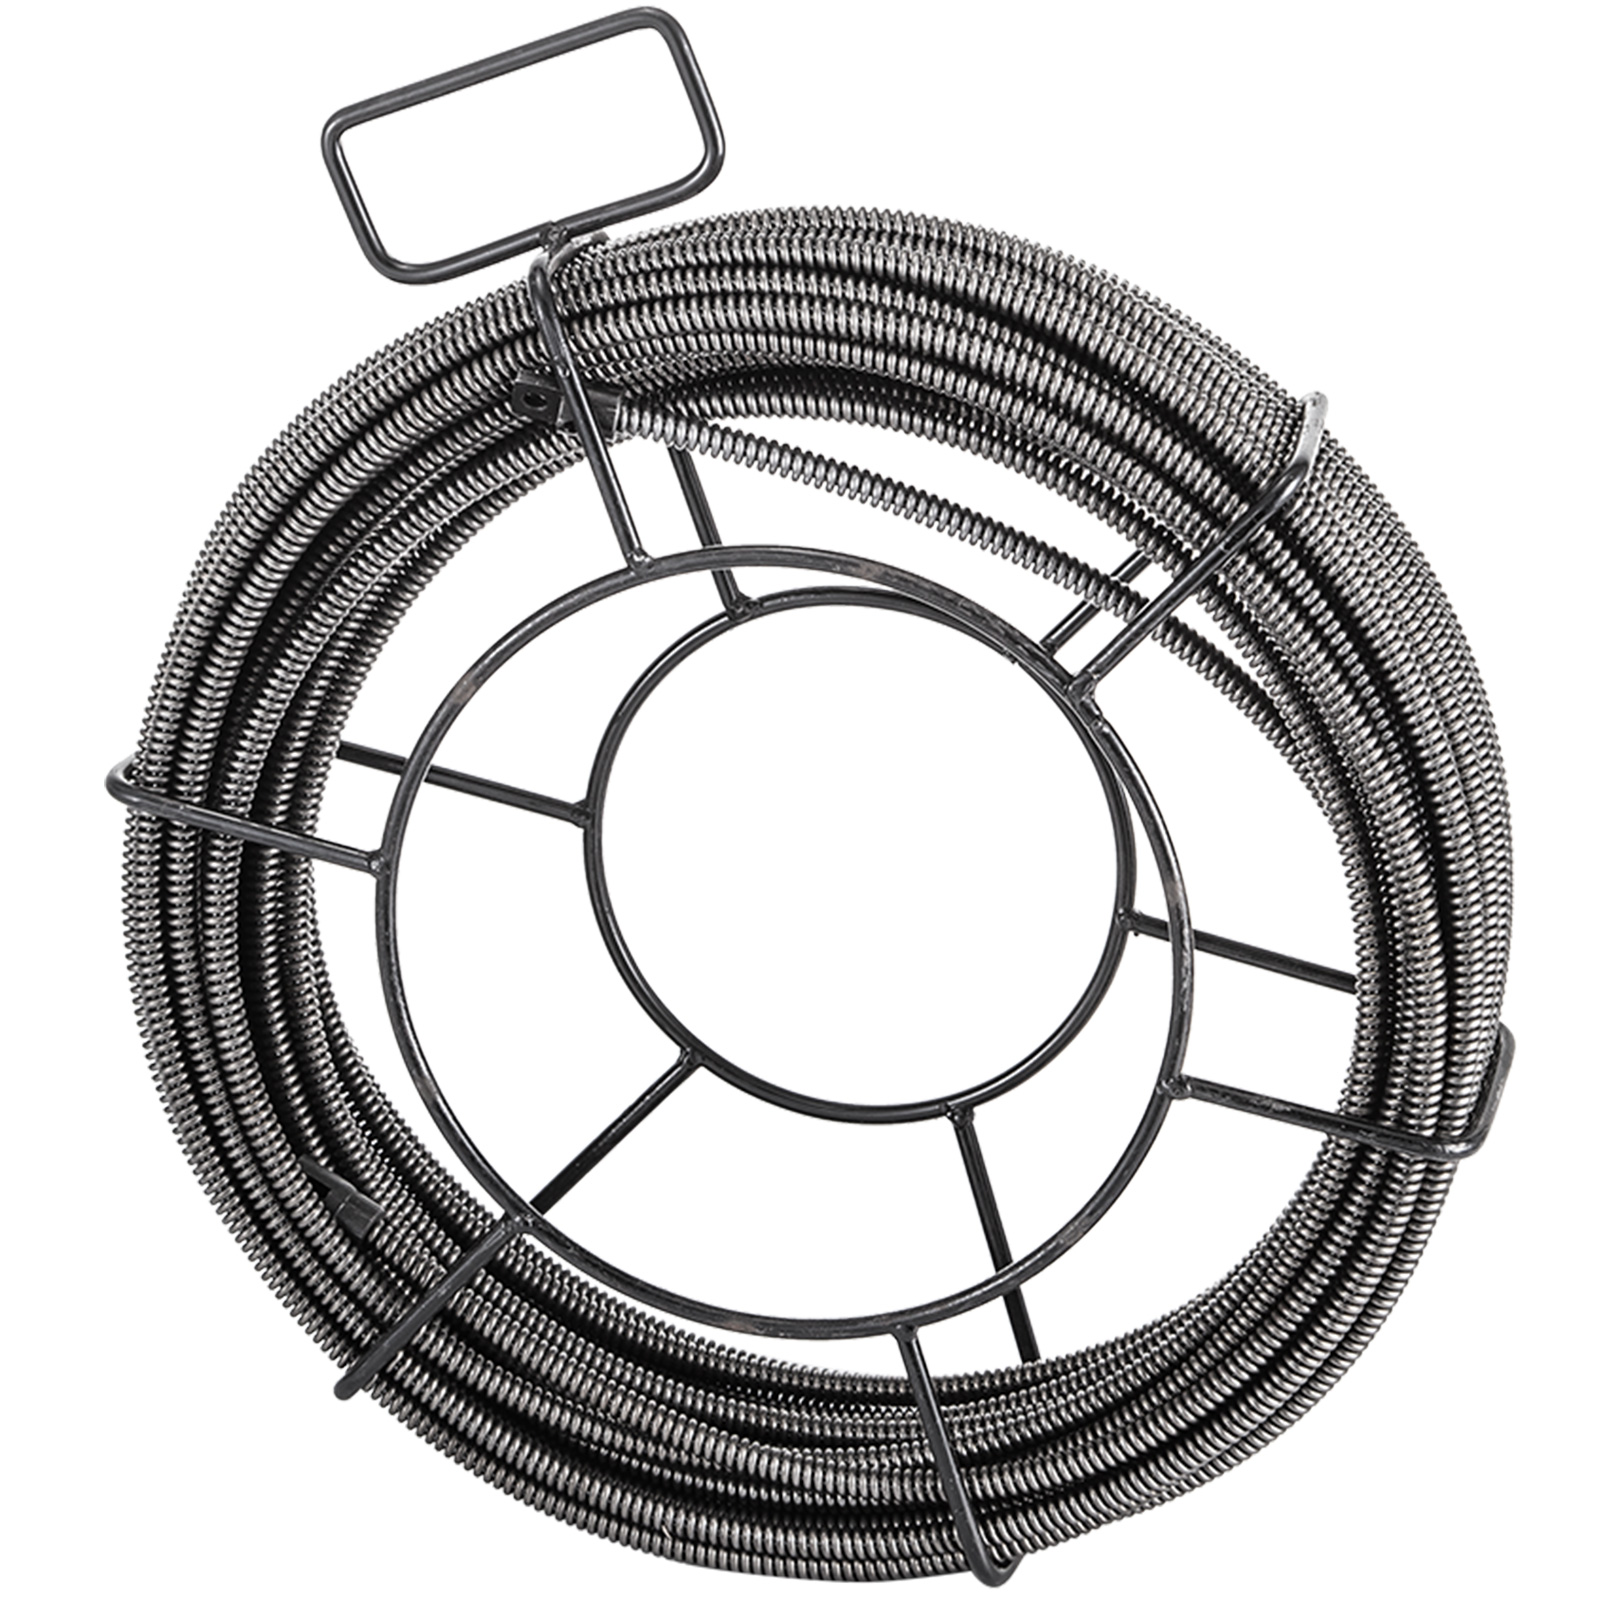 VEVORbrand Drain Cleaning Cable 100 Feet x 1/2 inch Solid Core Cable Sewer  Cable Drain Auger Cable Cleaner Snake